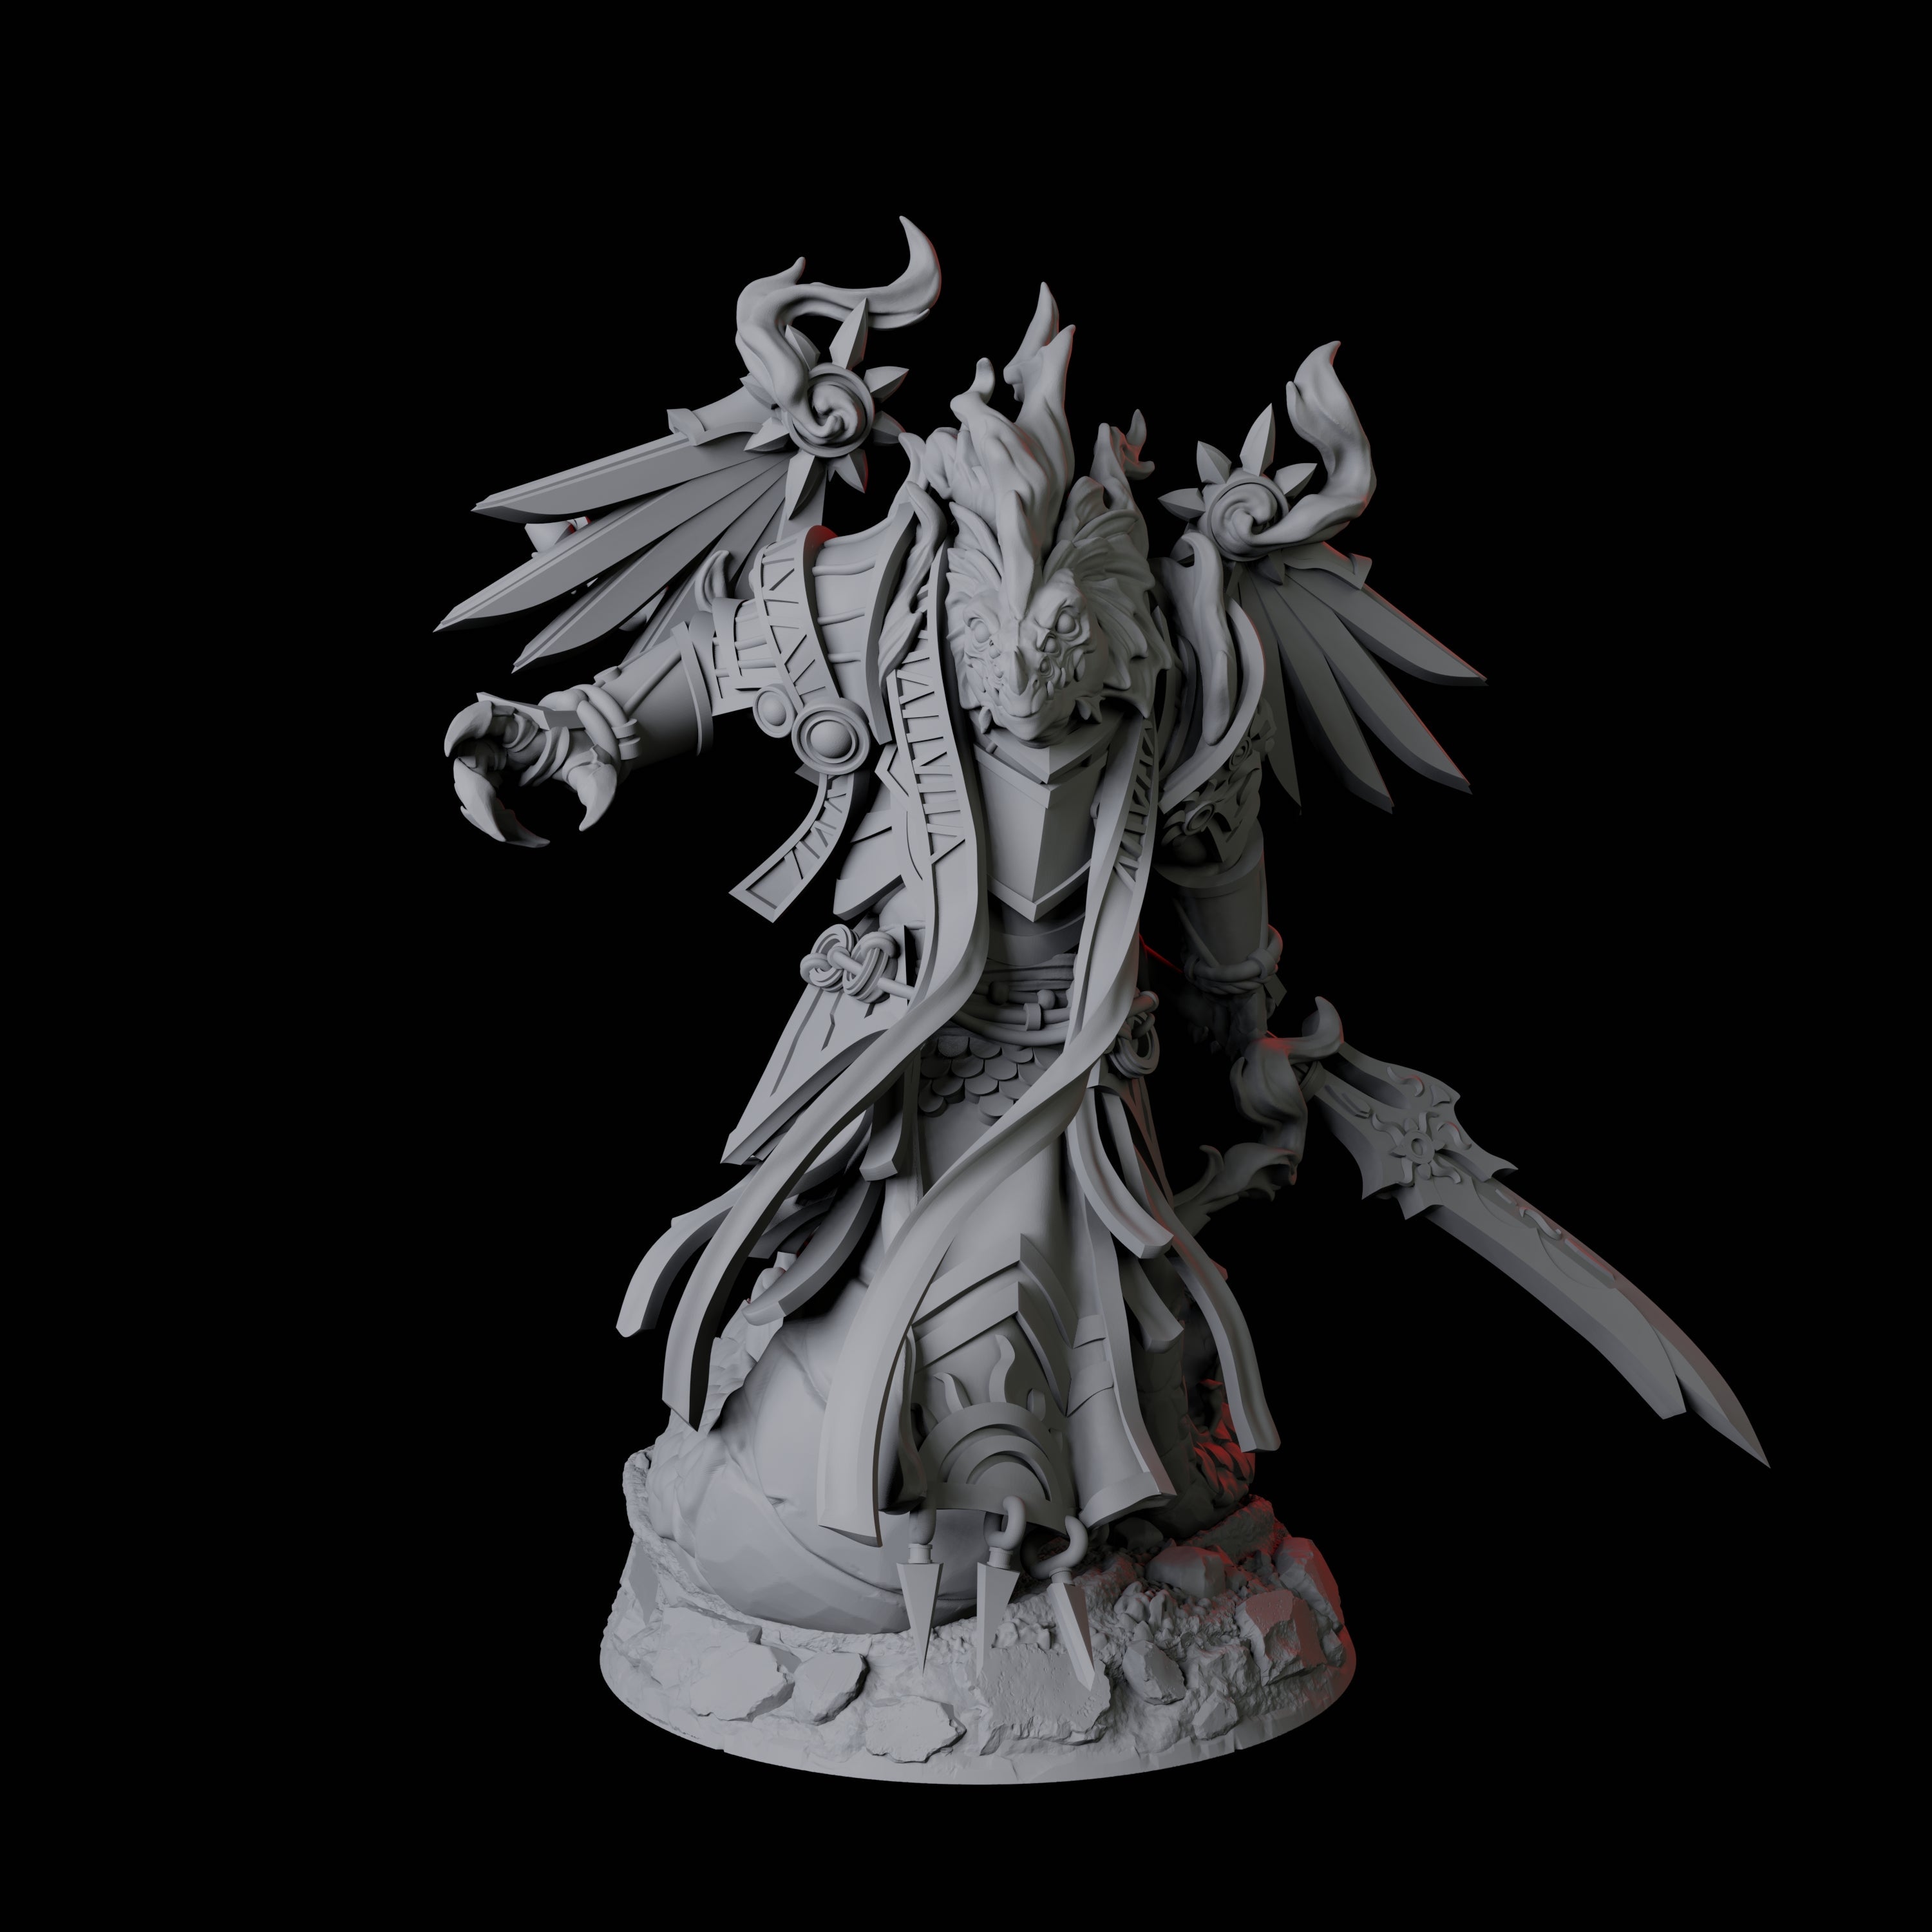 Tinkering Yuan-Ti Abomination Artificer Miniature for Dungeons and Dragons, Pathfinder or other TTRPGs